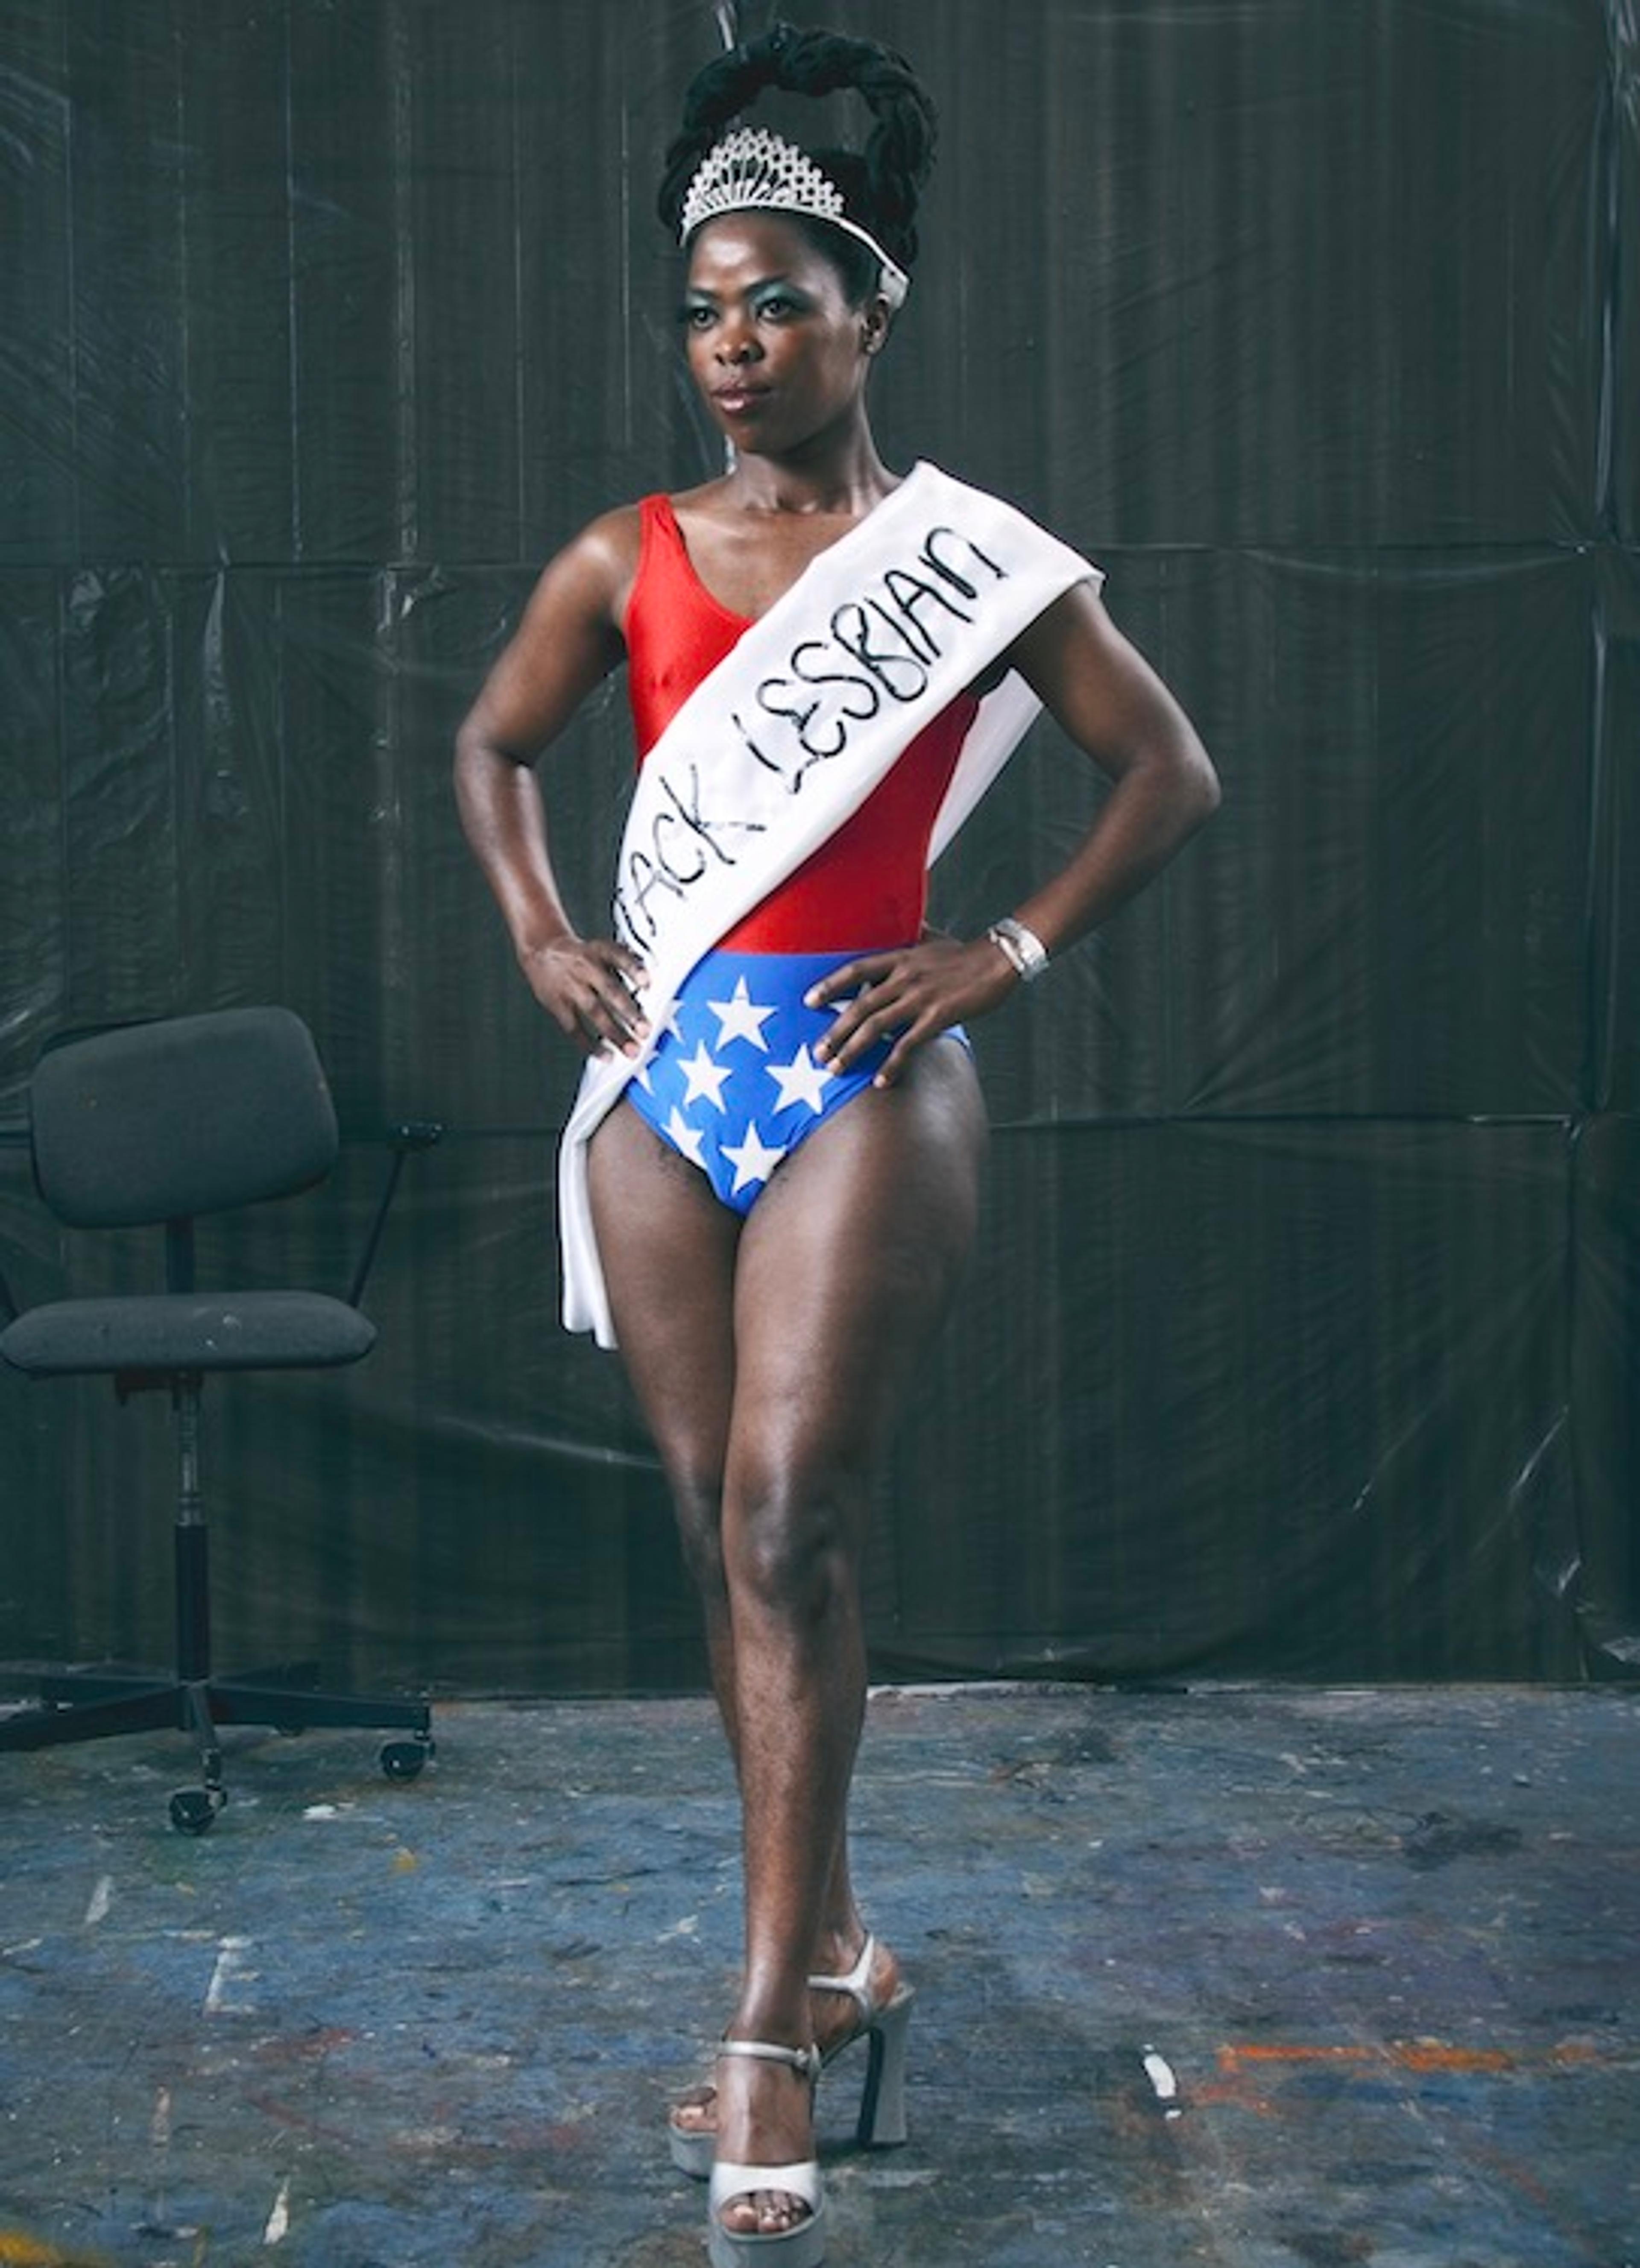 A portrait of a woman wearing a crown, swimsuit, and sash that reads "Miss Black Lesbian"